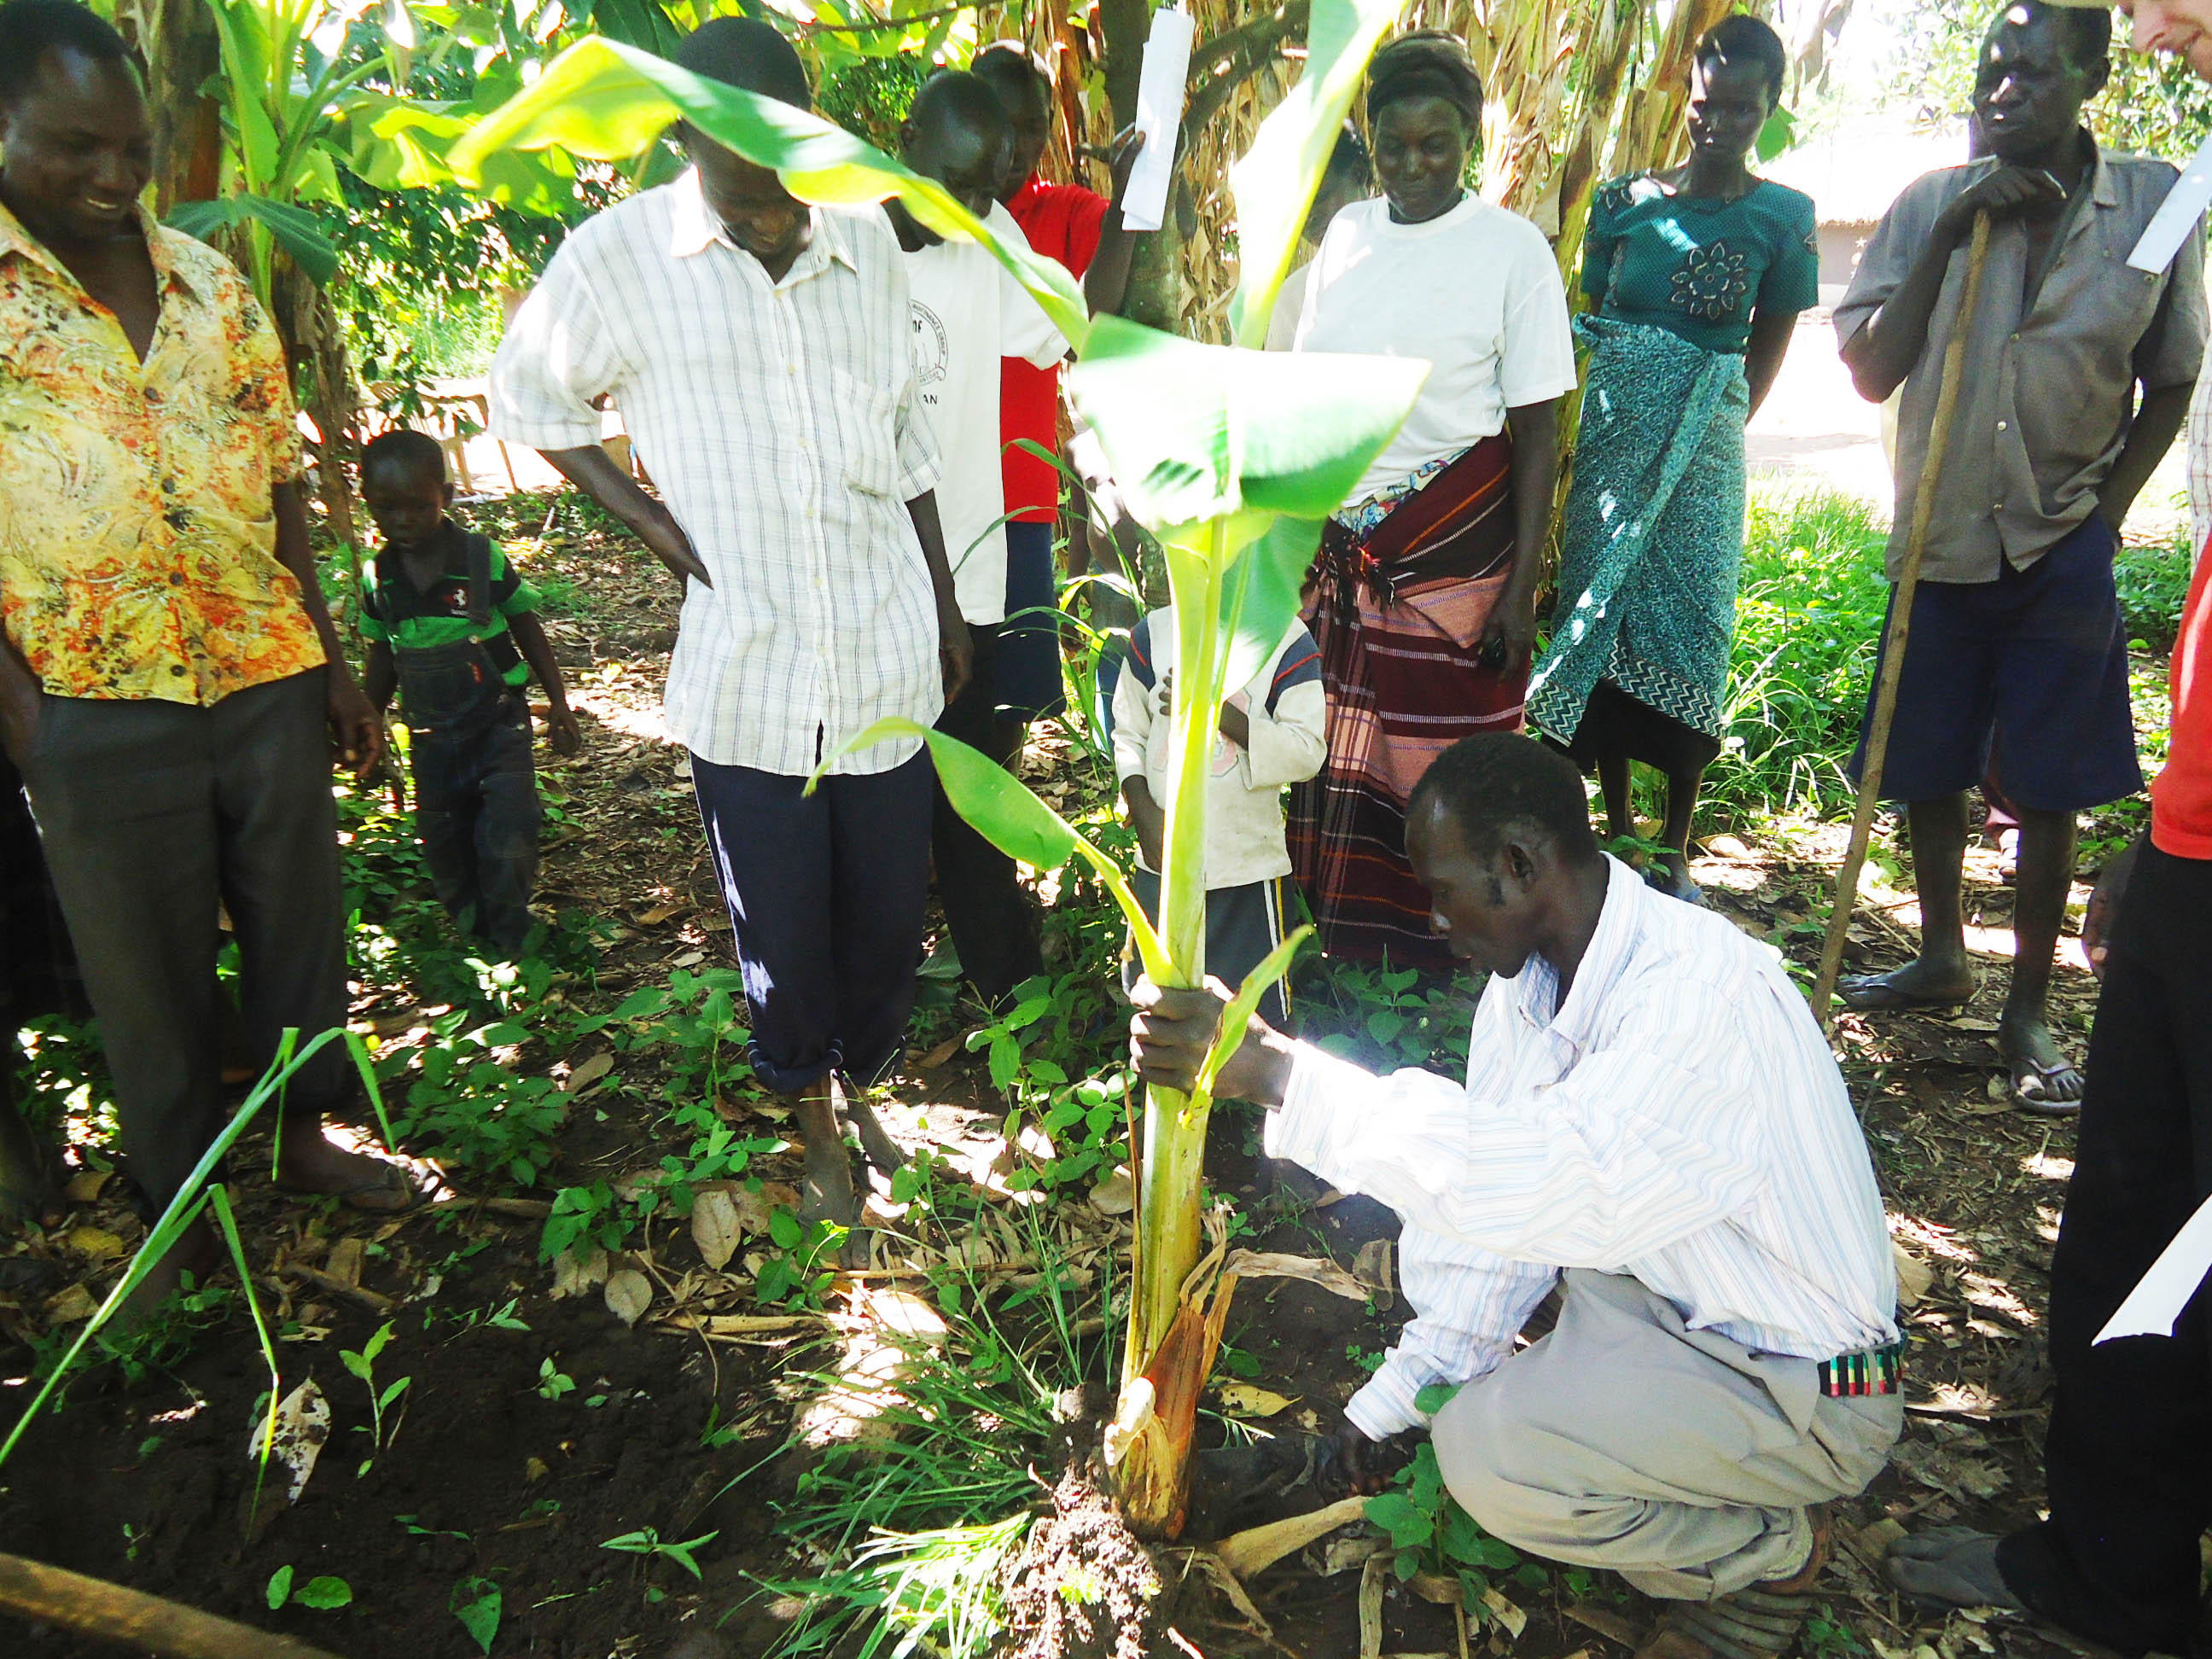 People learning how to plant and grow bananas